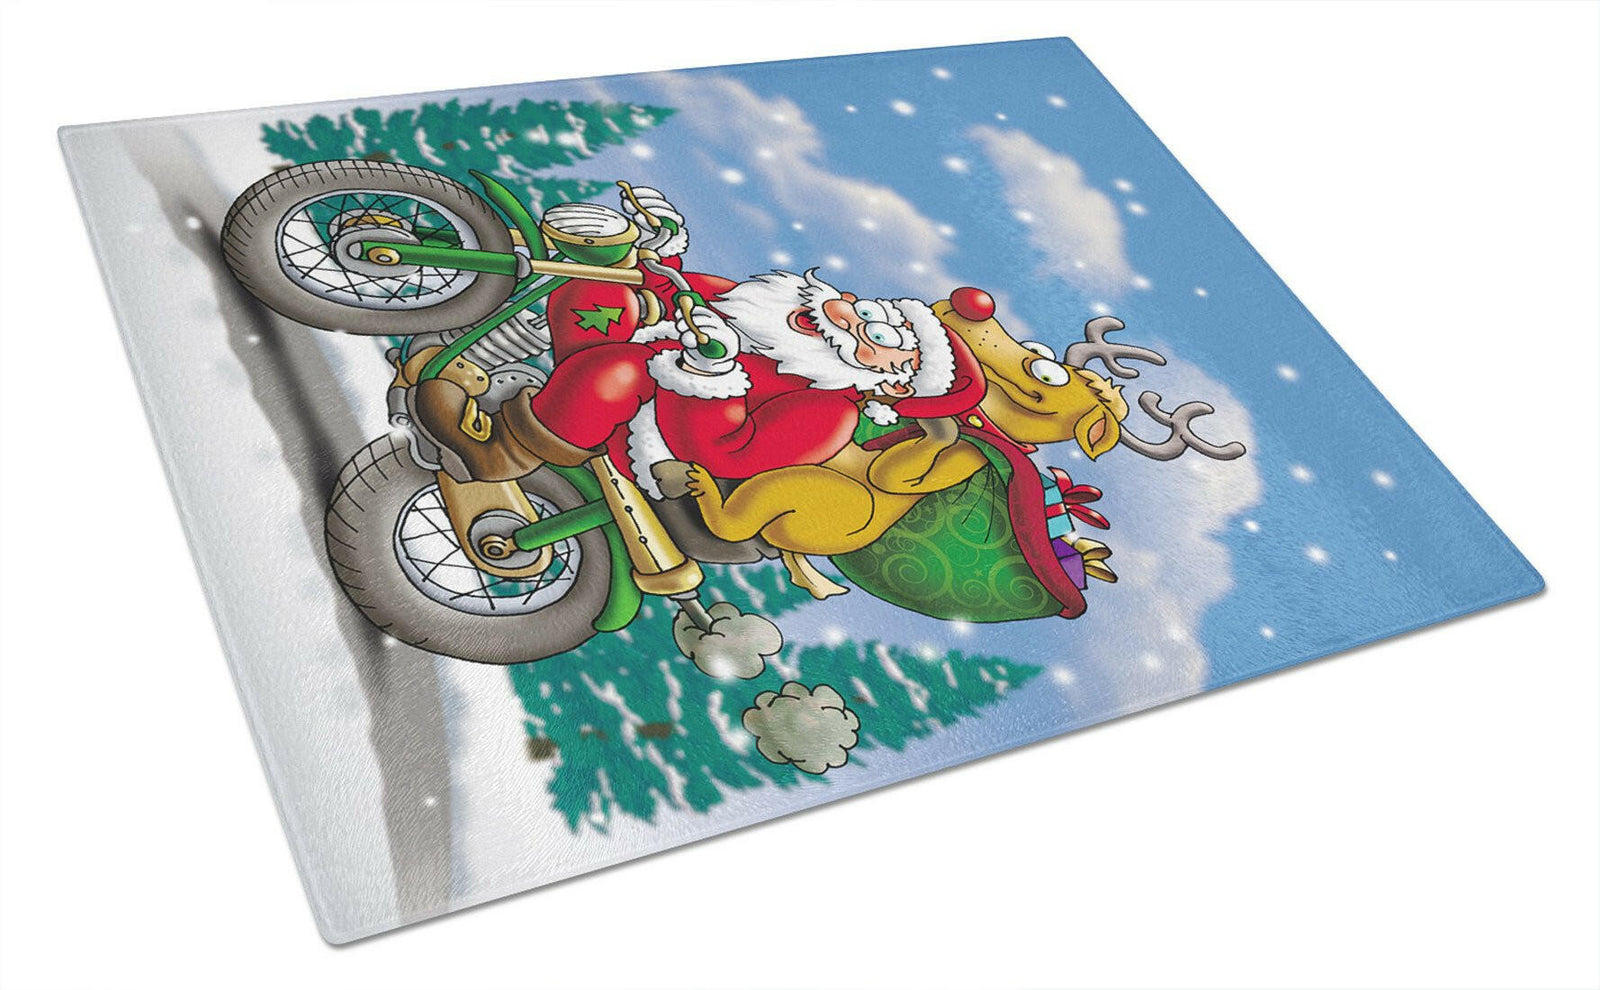 Christmas Santa Claus on a Motorcycle Glass Cutting Board Large APH8996LCB by Caroline's Treasures